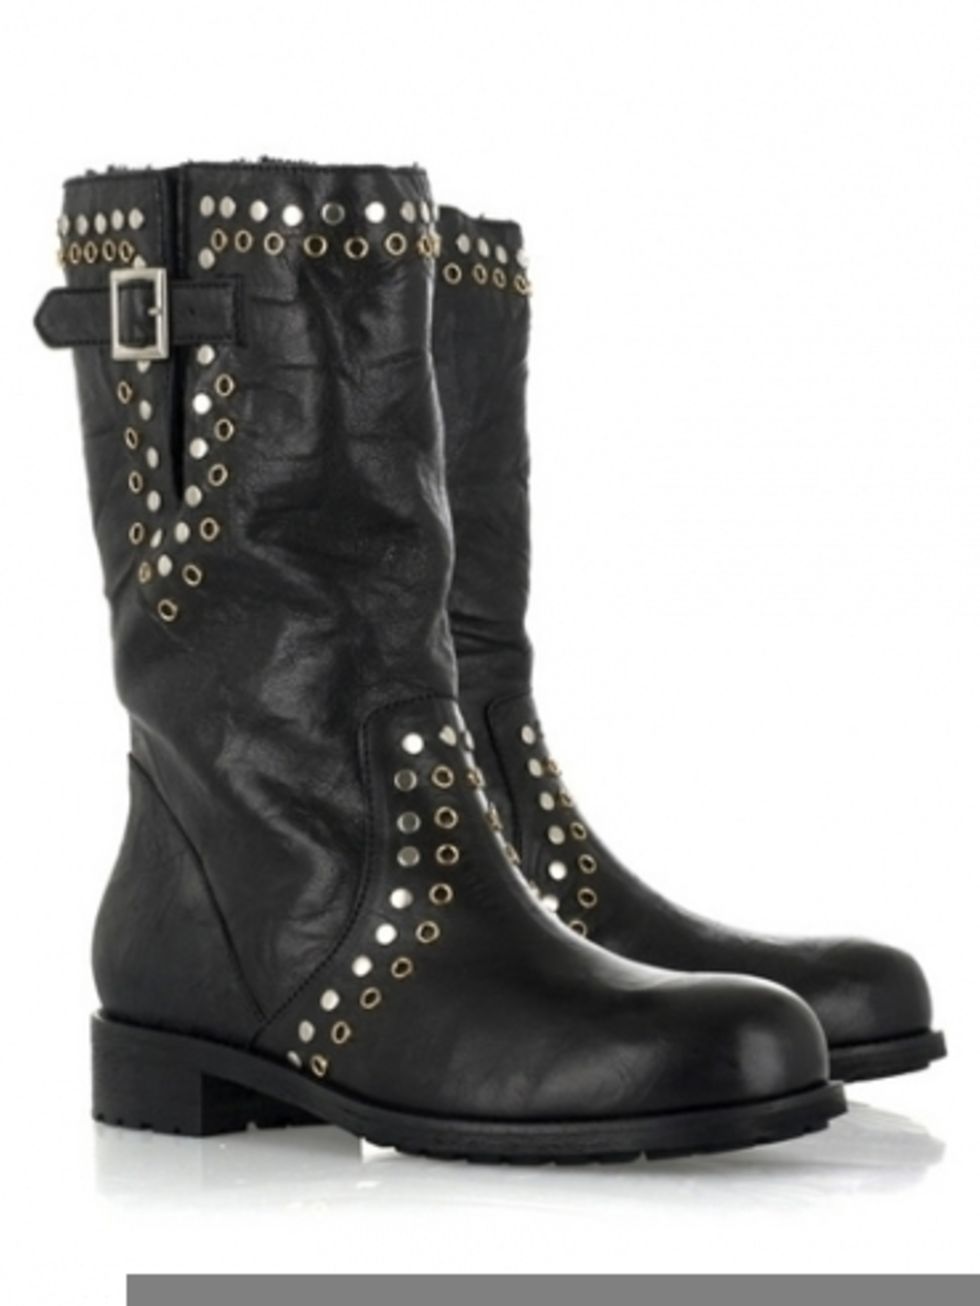 Footwear, Boot, Fashion, Black, Leather, Fashion design, Buckle, Synthetic rubber, Motorcycle boot, 